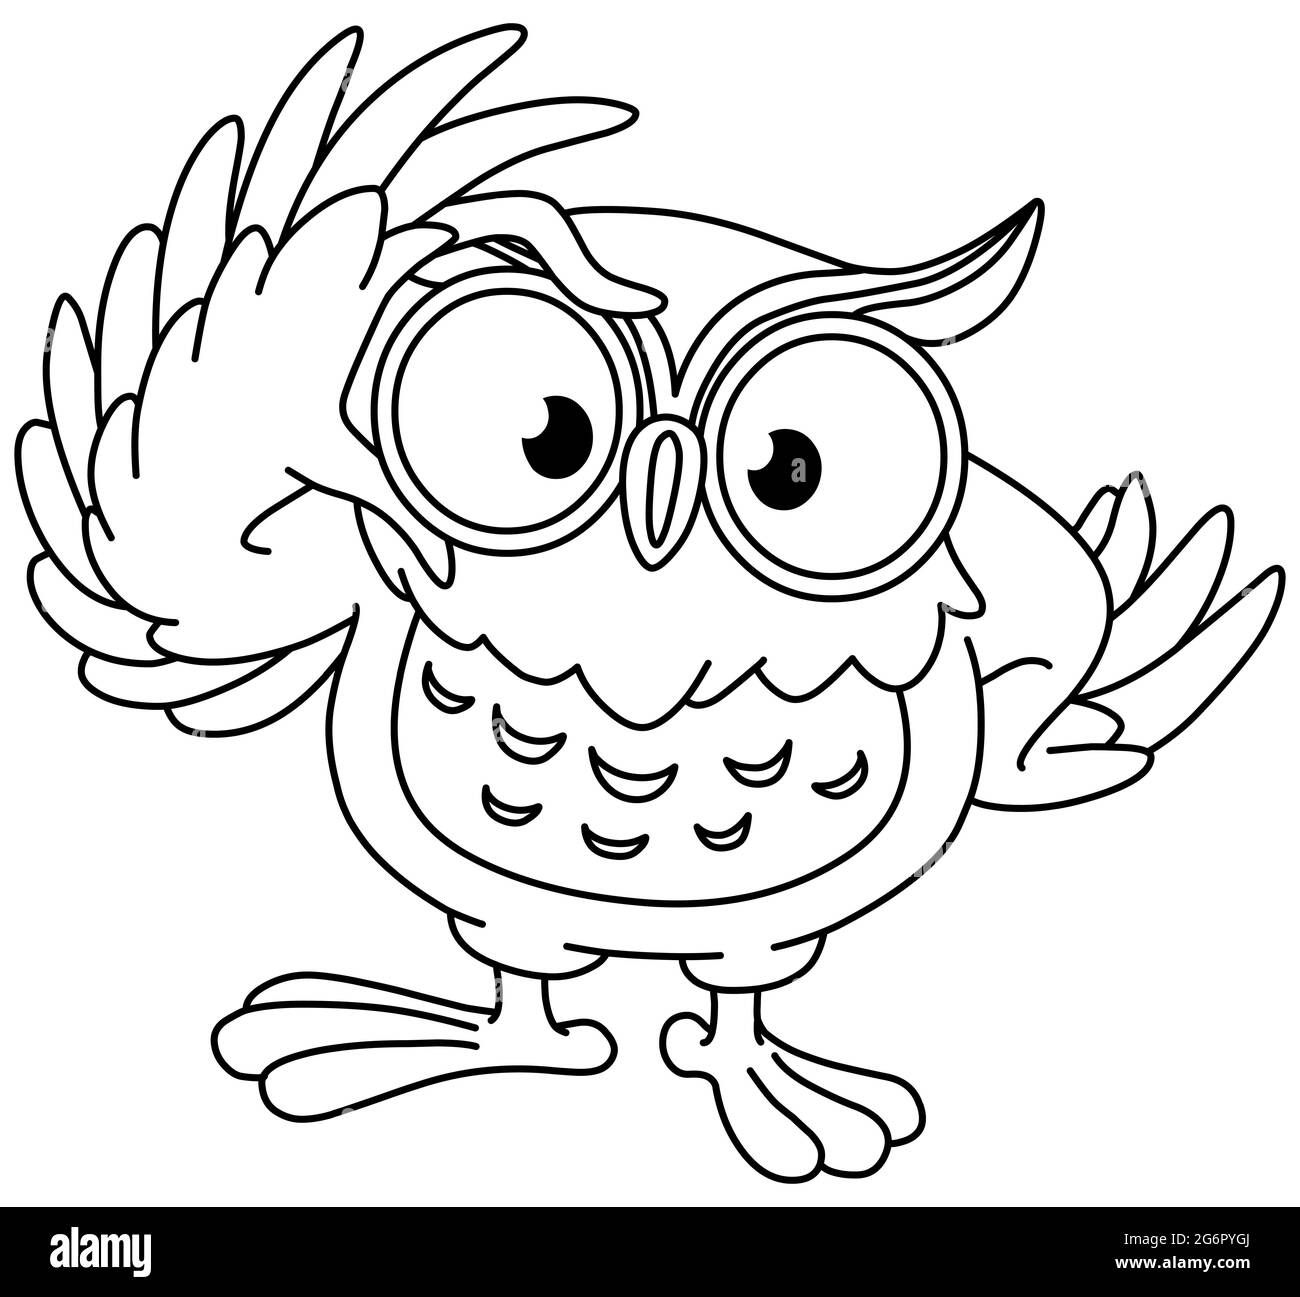 Owl touching his glasses. Vector line art illustration coloring page. Stock Photo